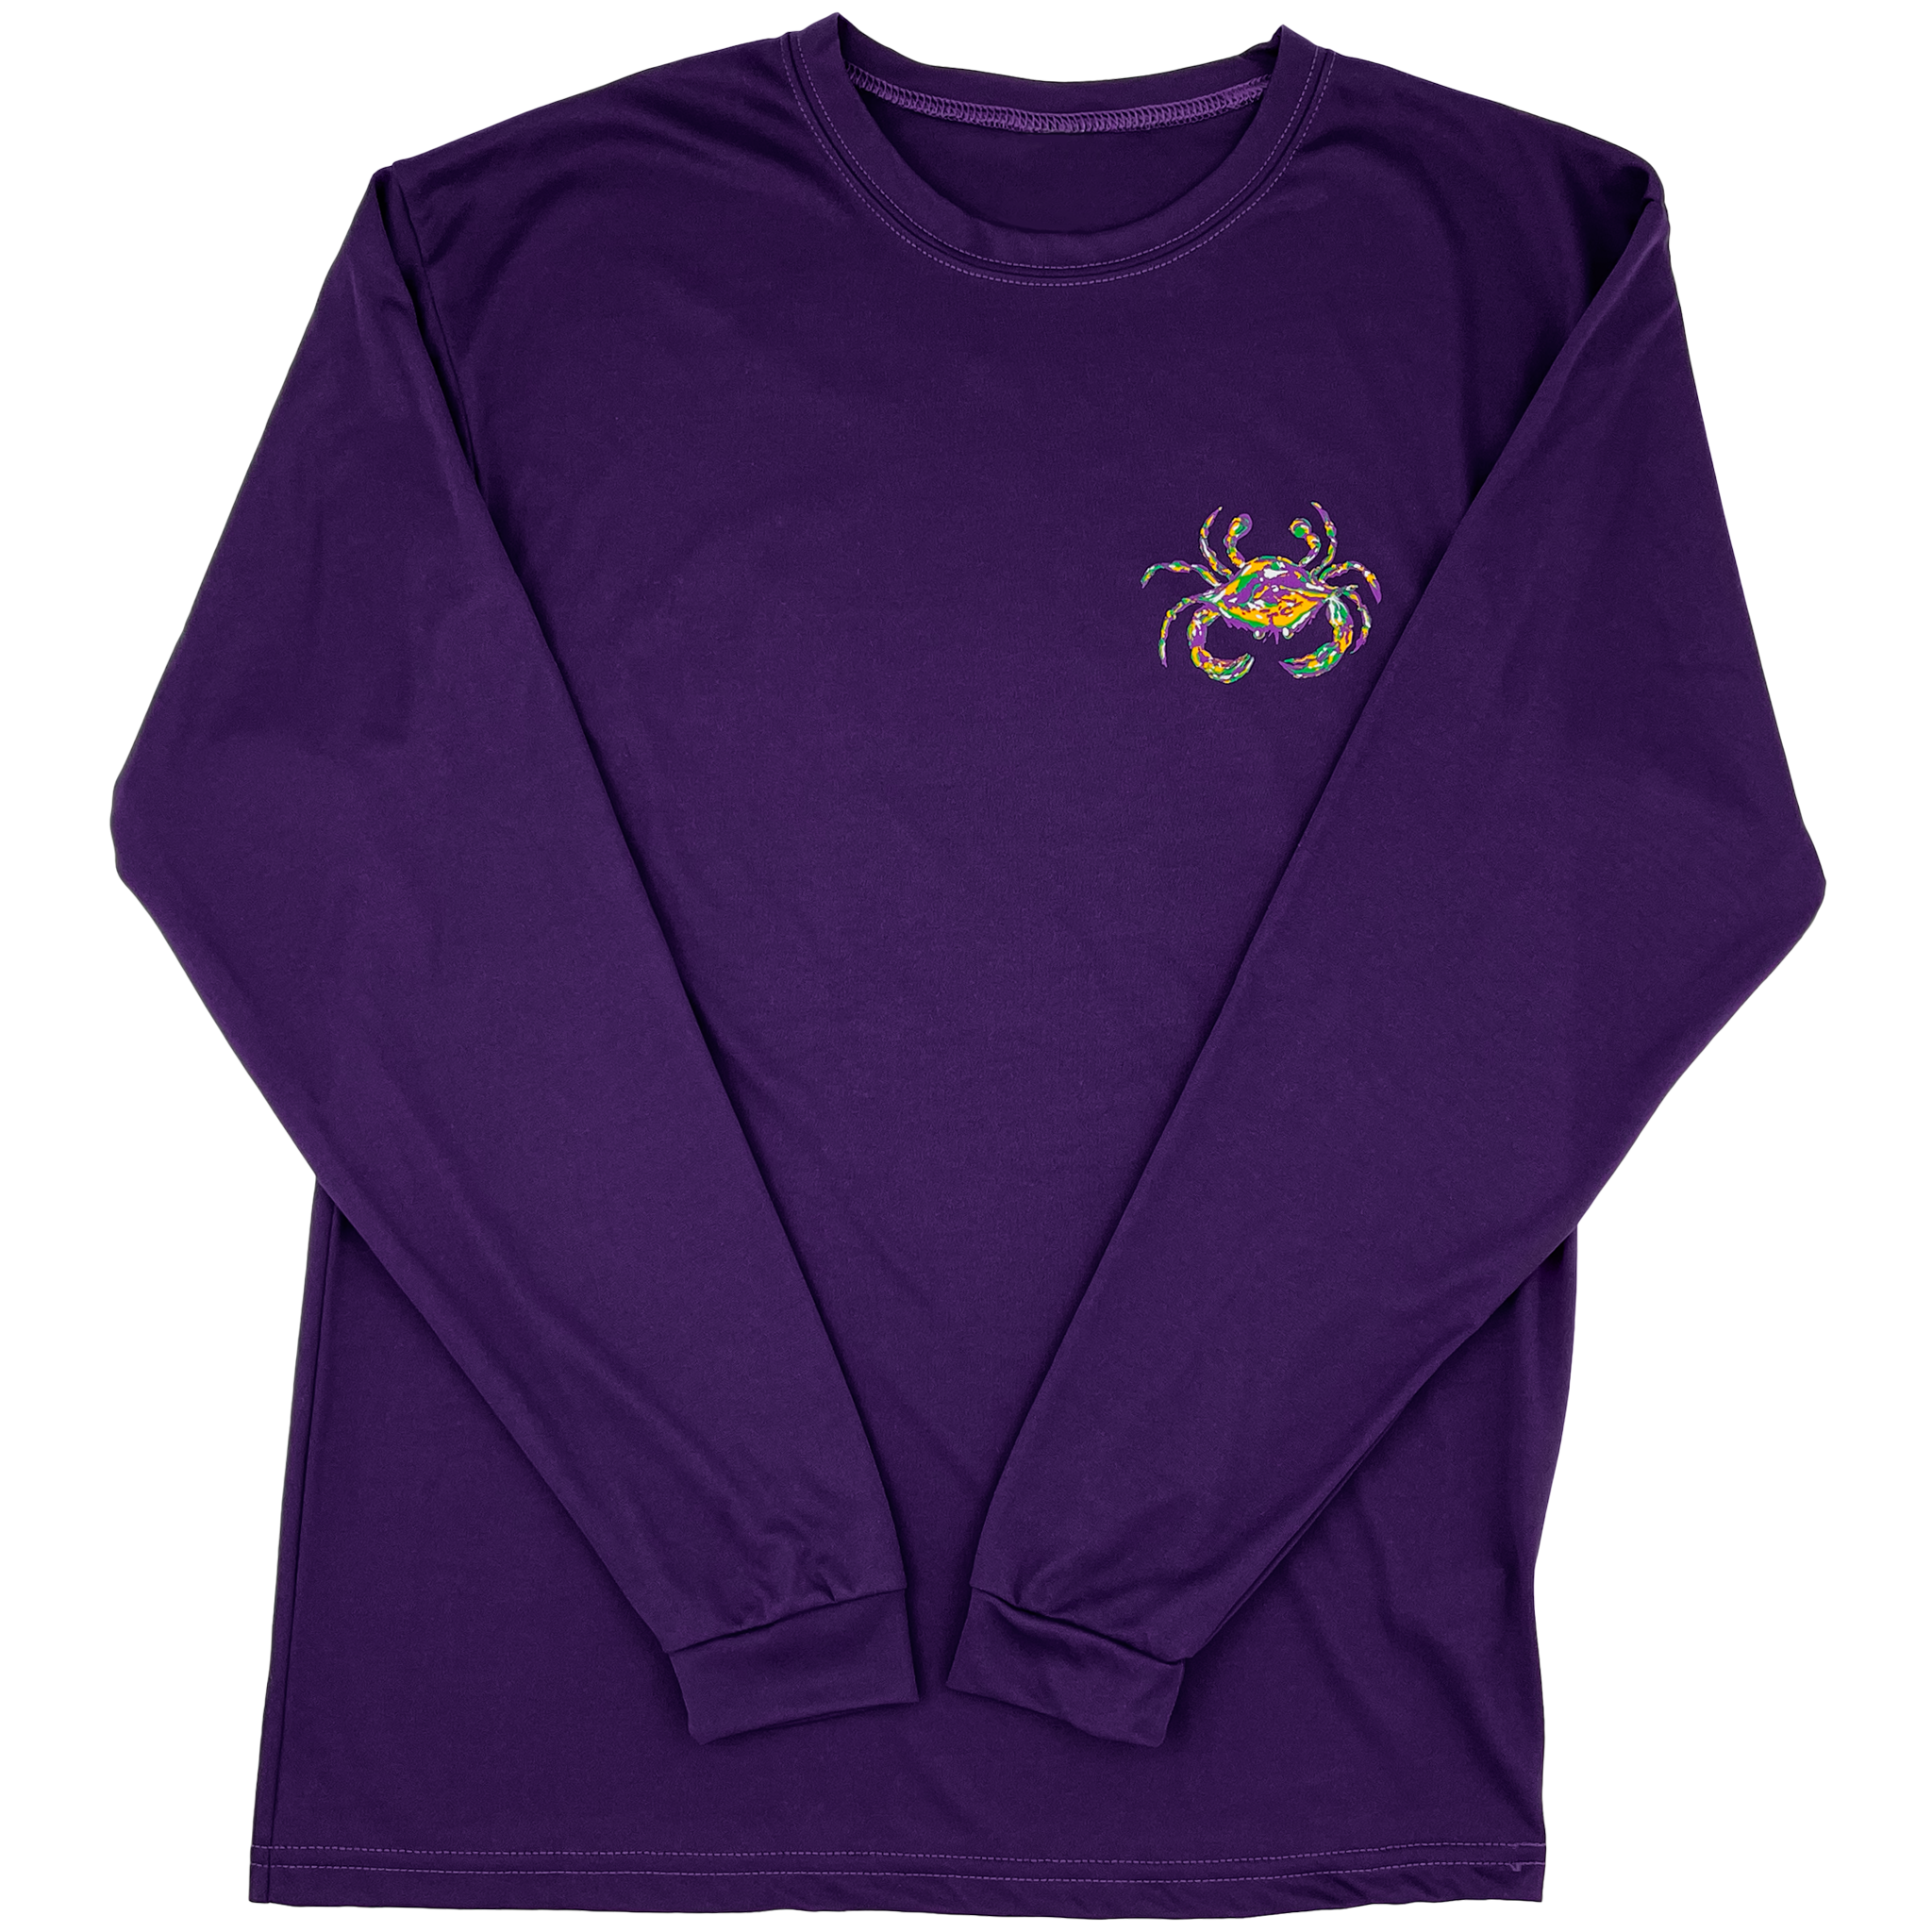 The front of a royal purple Mardi Gras shirt with a crab on the left chest.